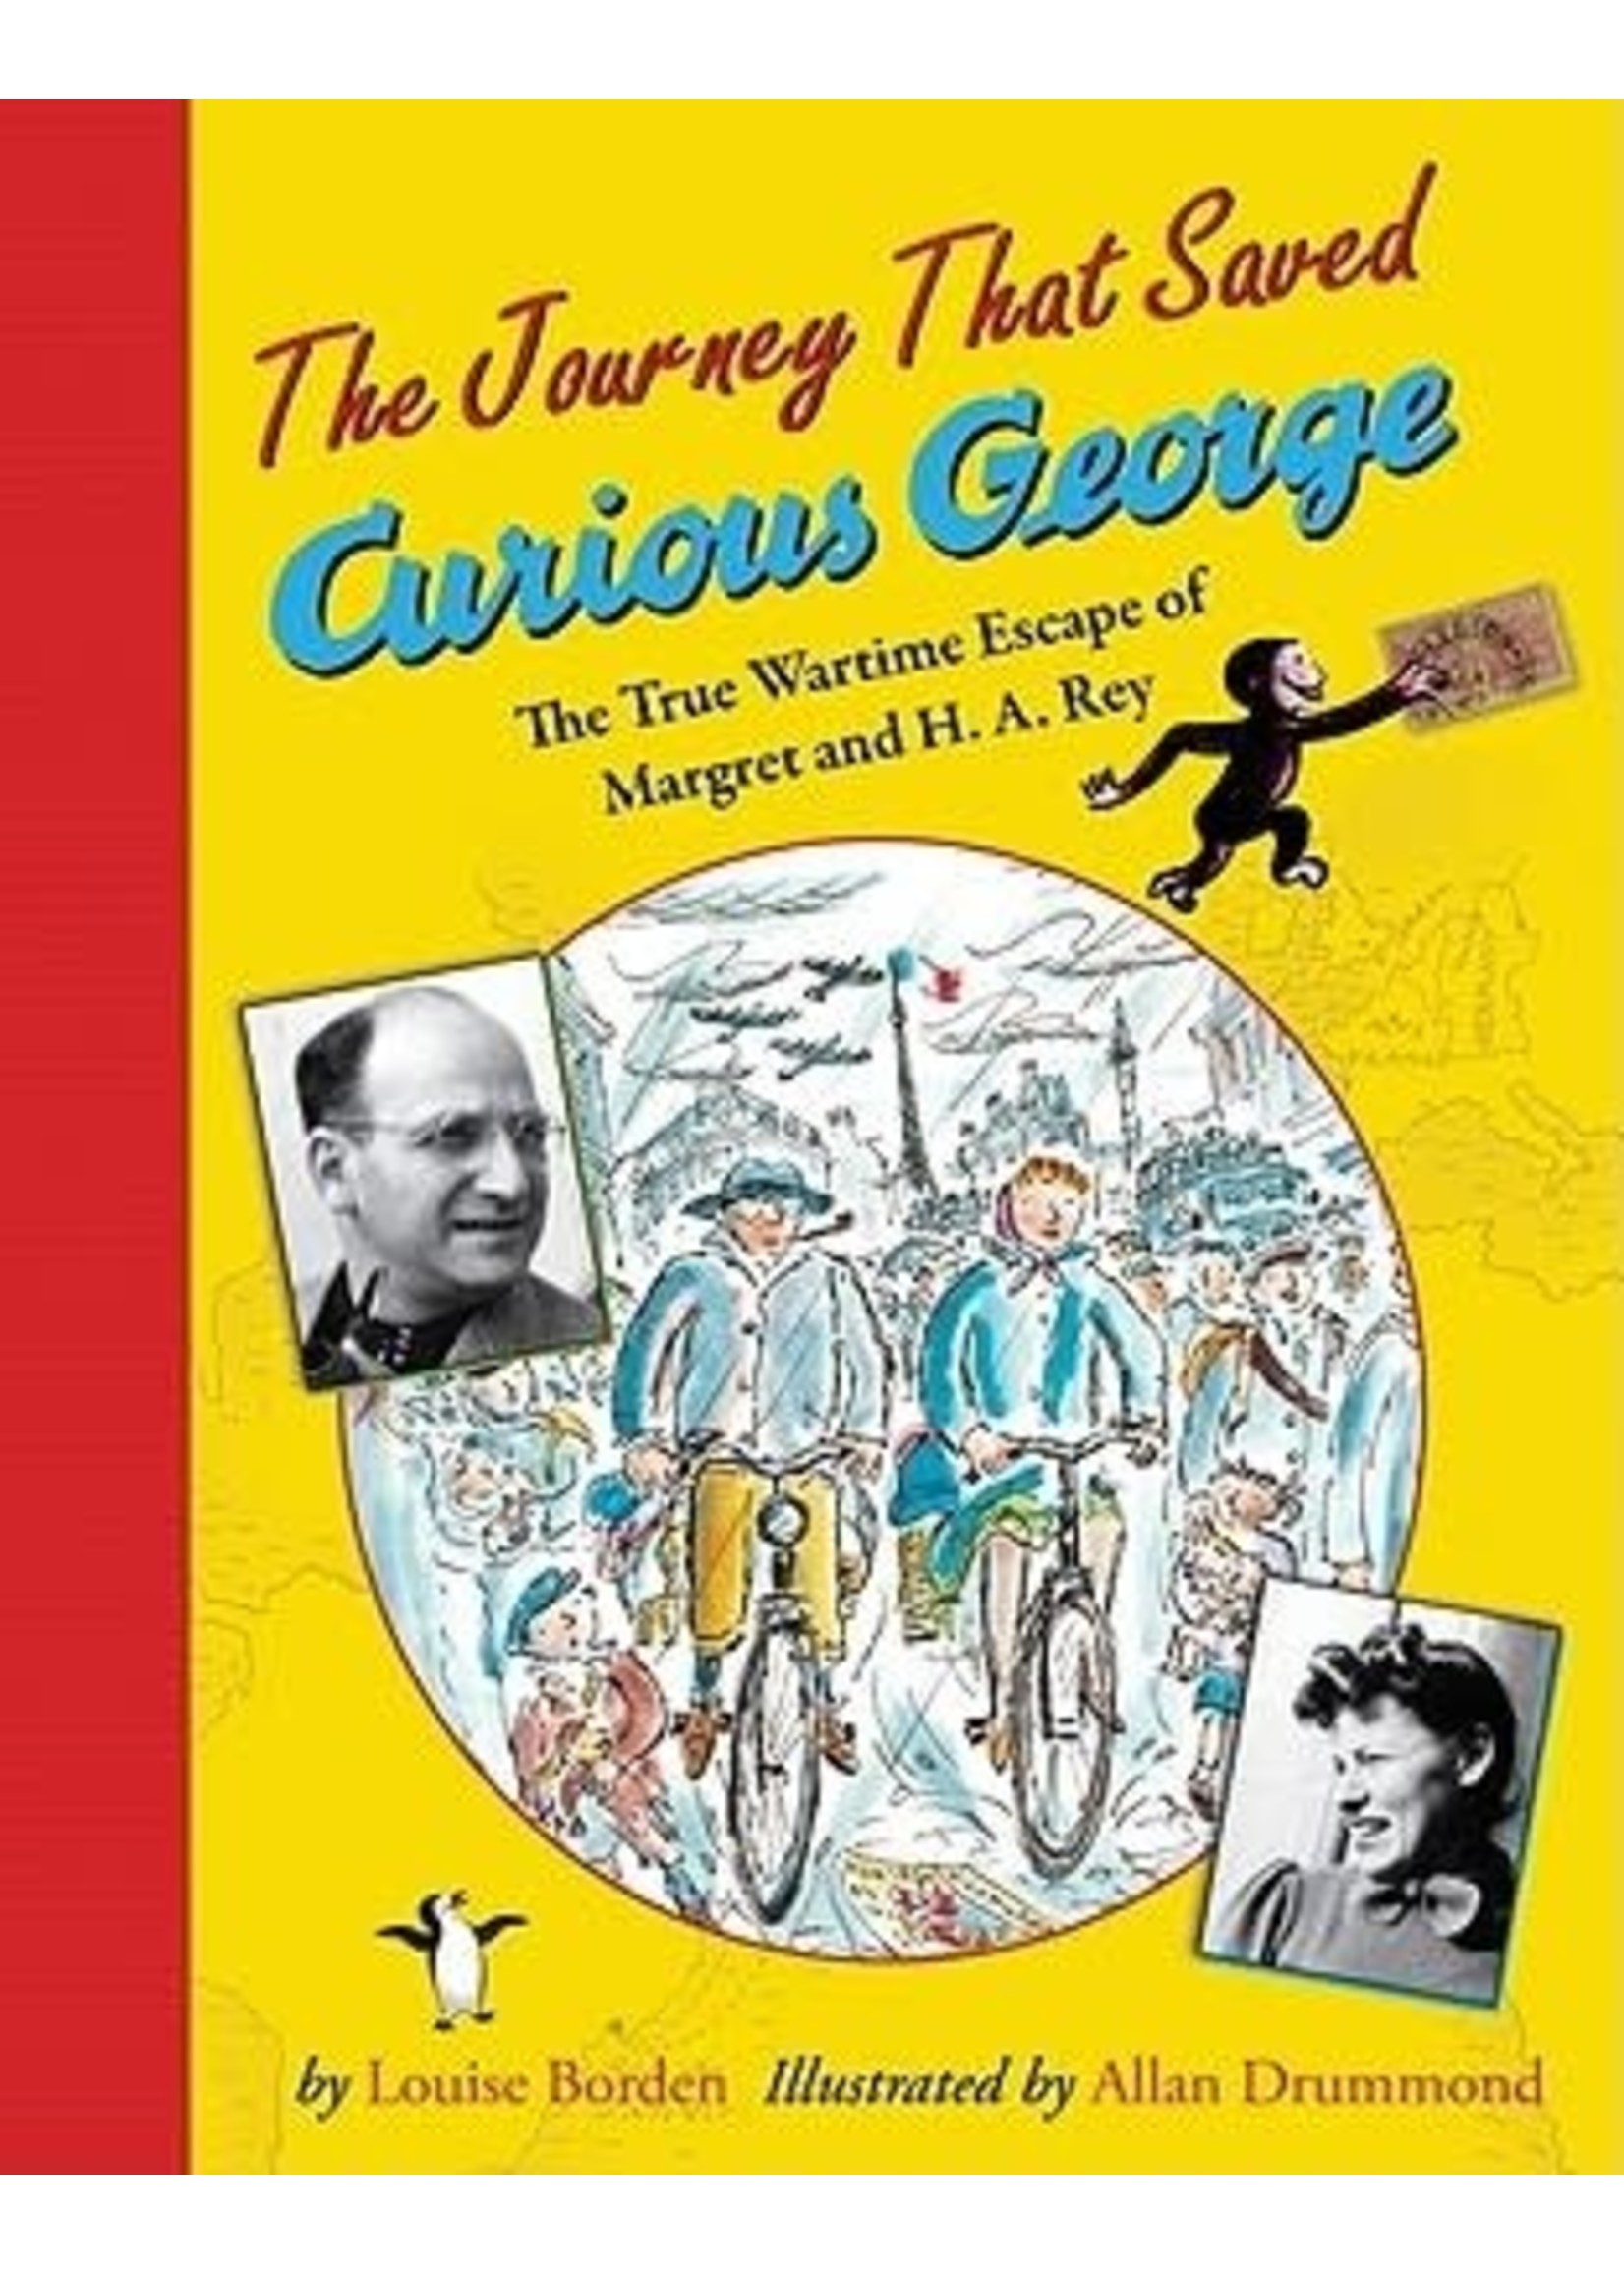 The Journey That Saved Curious George: The True Wartime Escape of Margret and H. A. Rey by Louise Borden